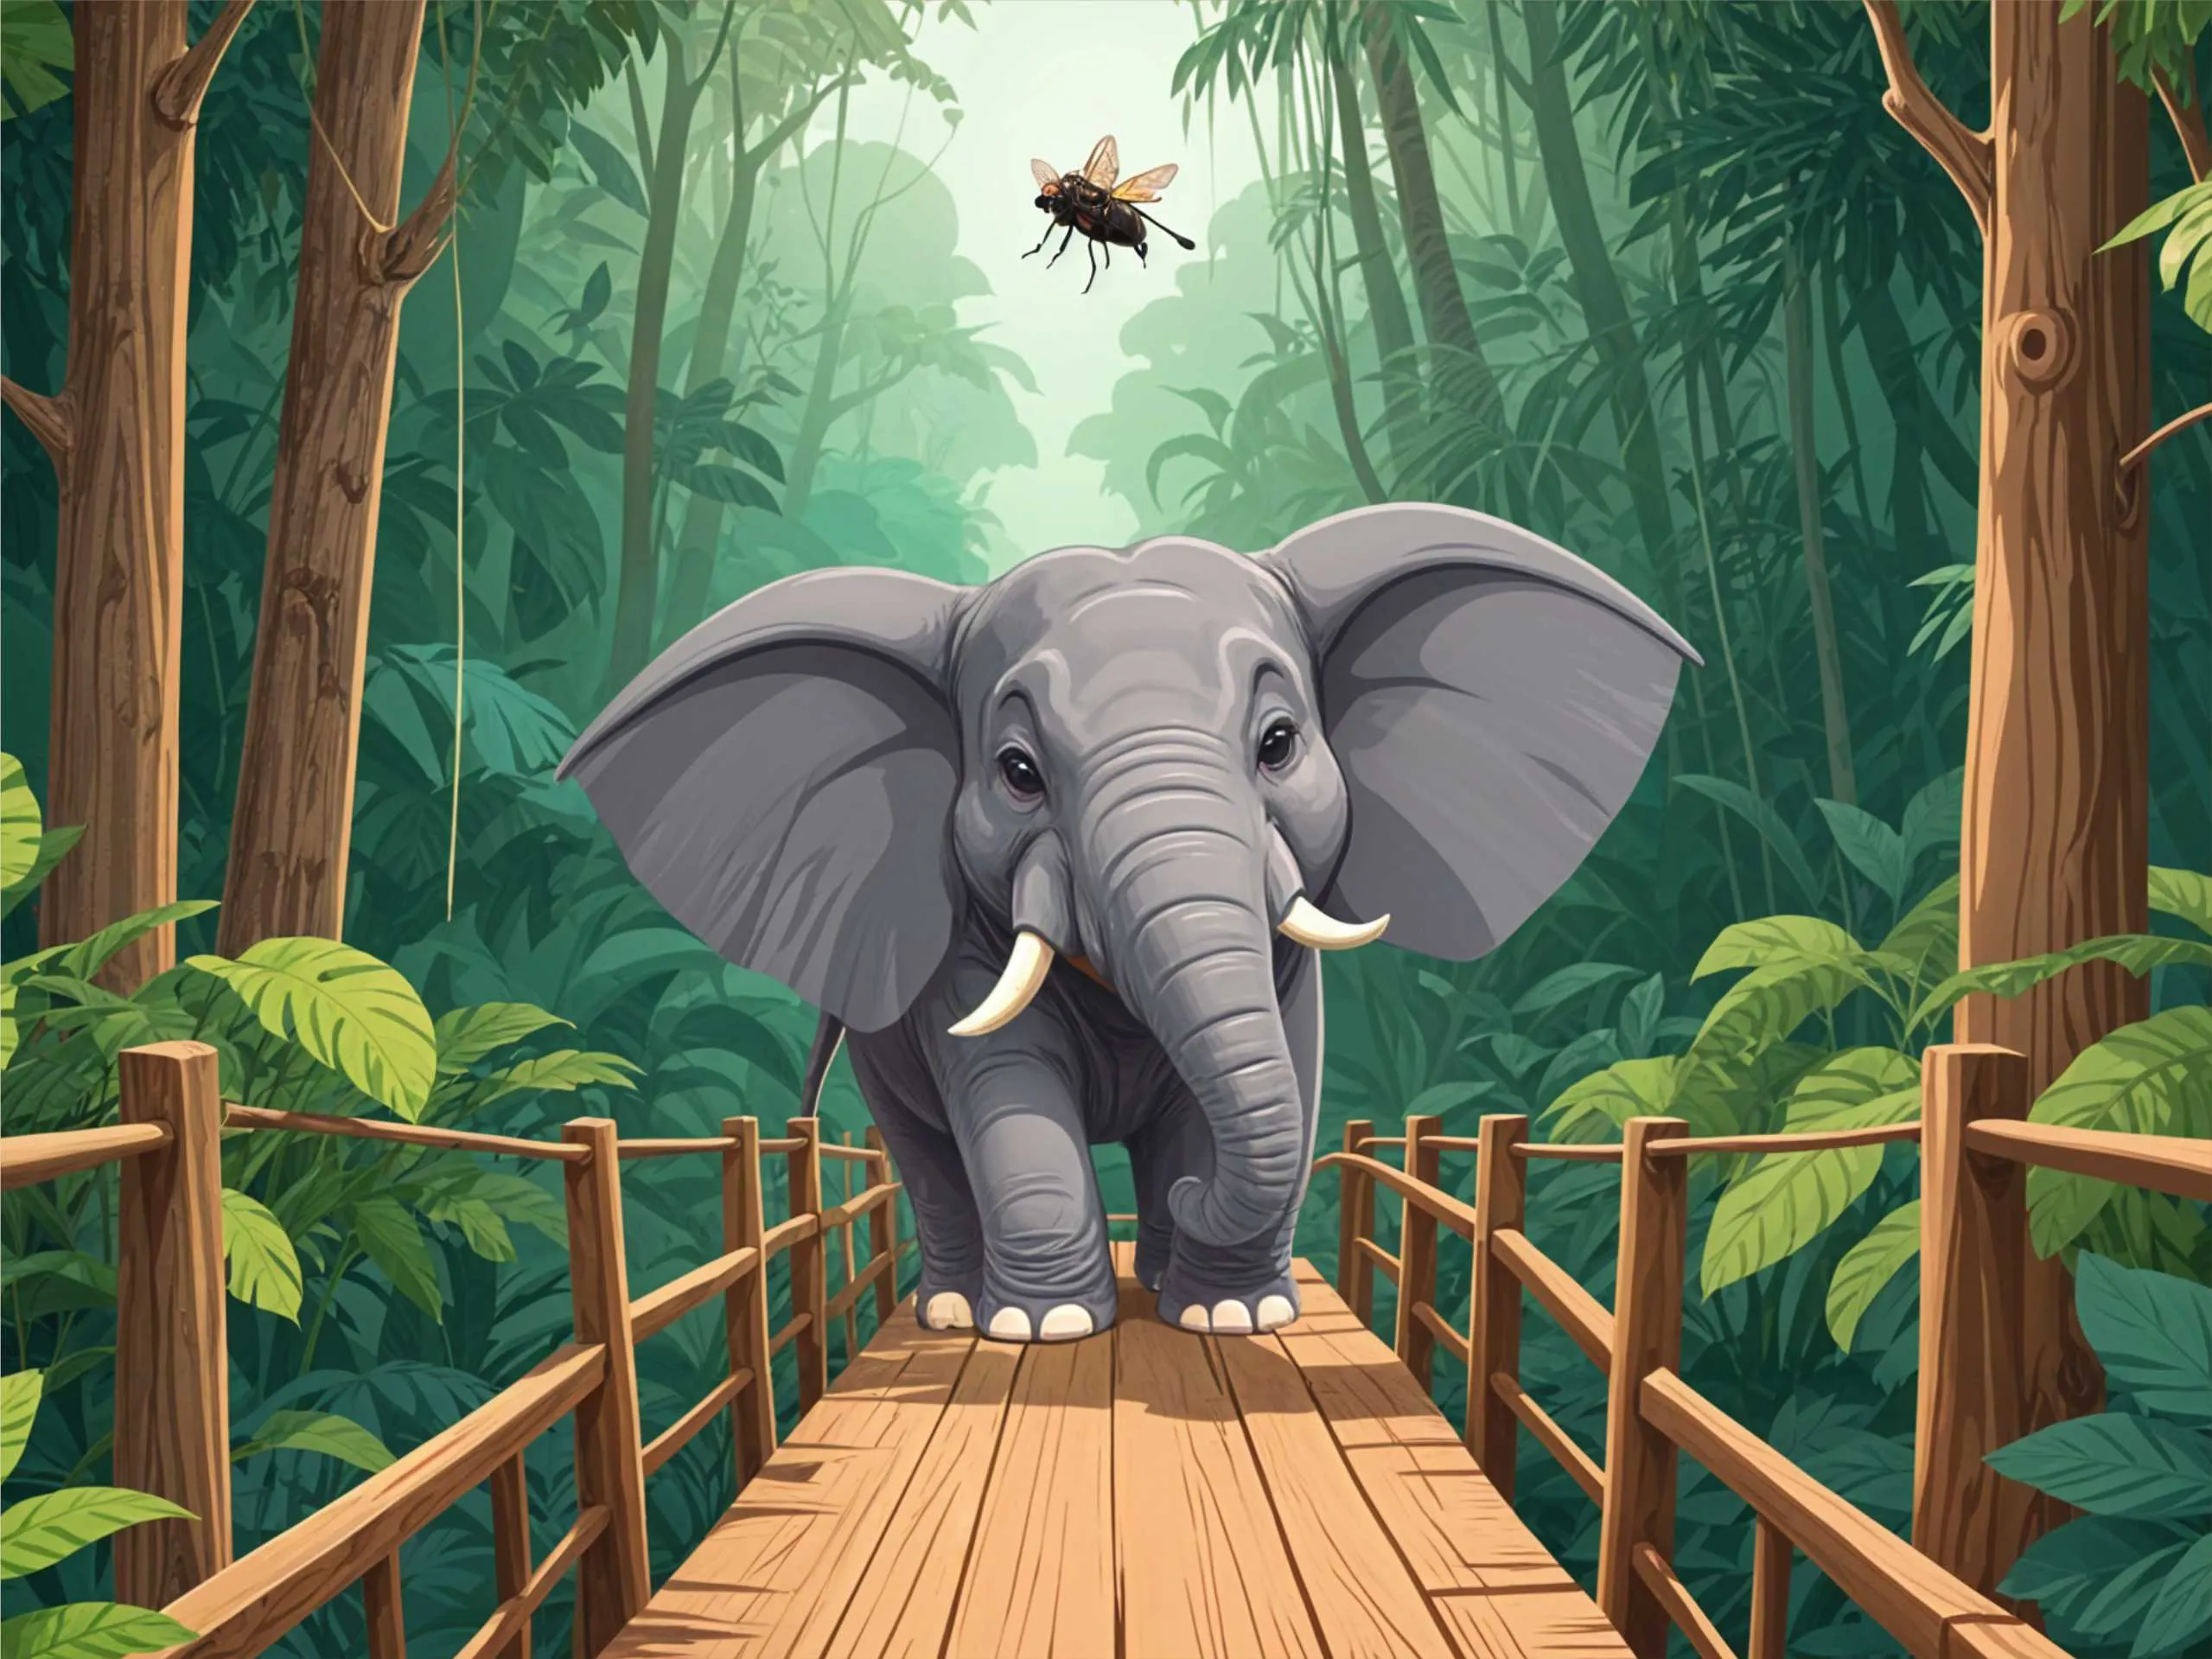 cartoon image of an elephant and fly in jungle